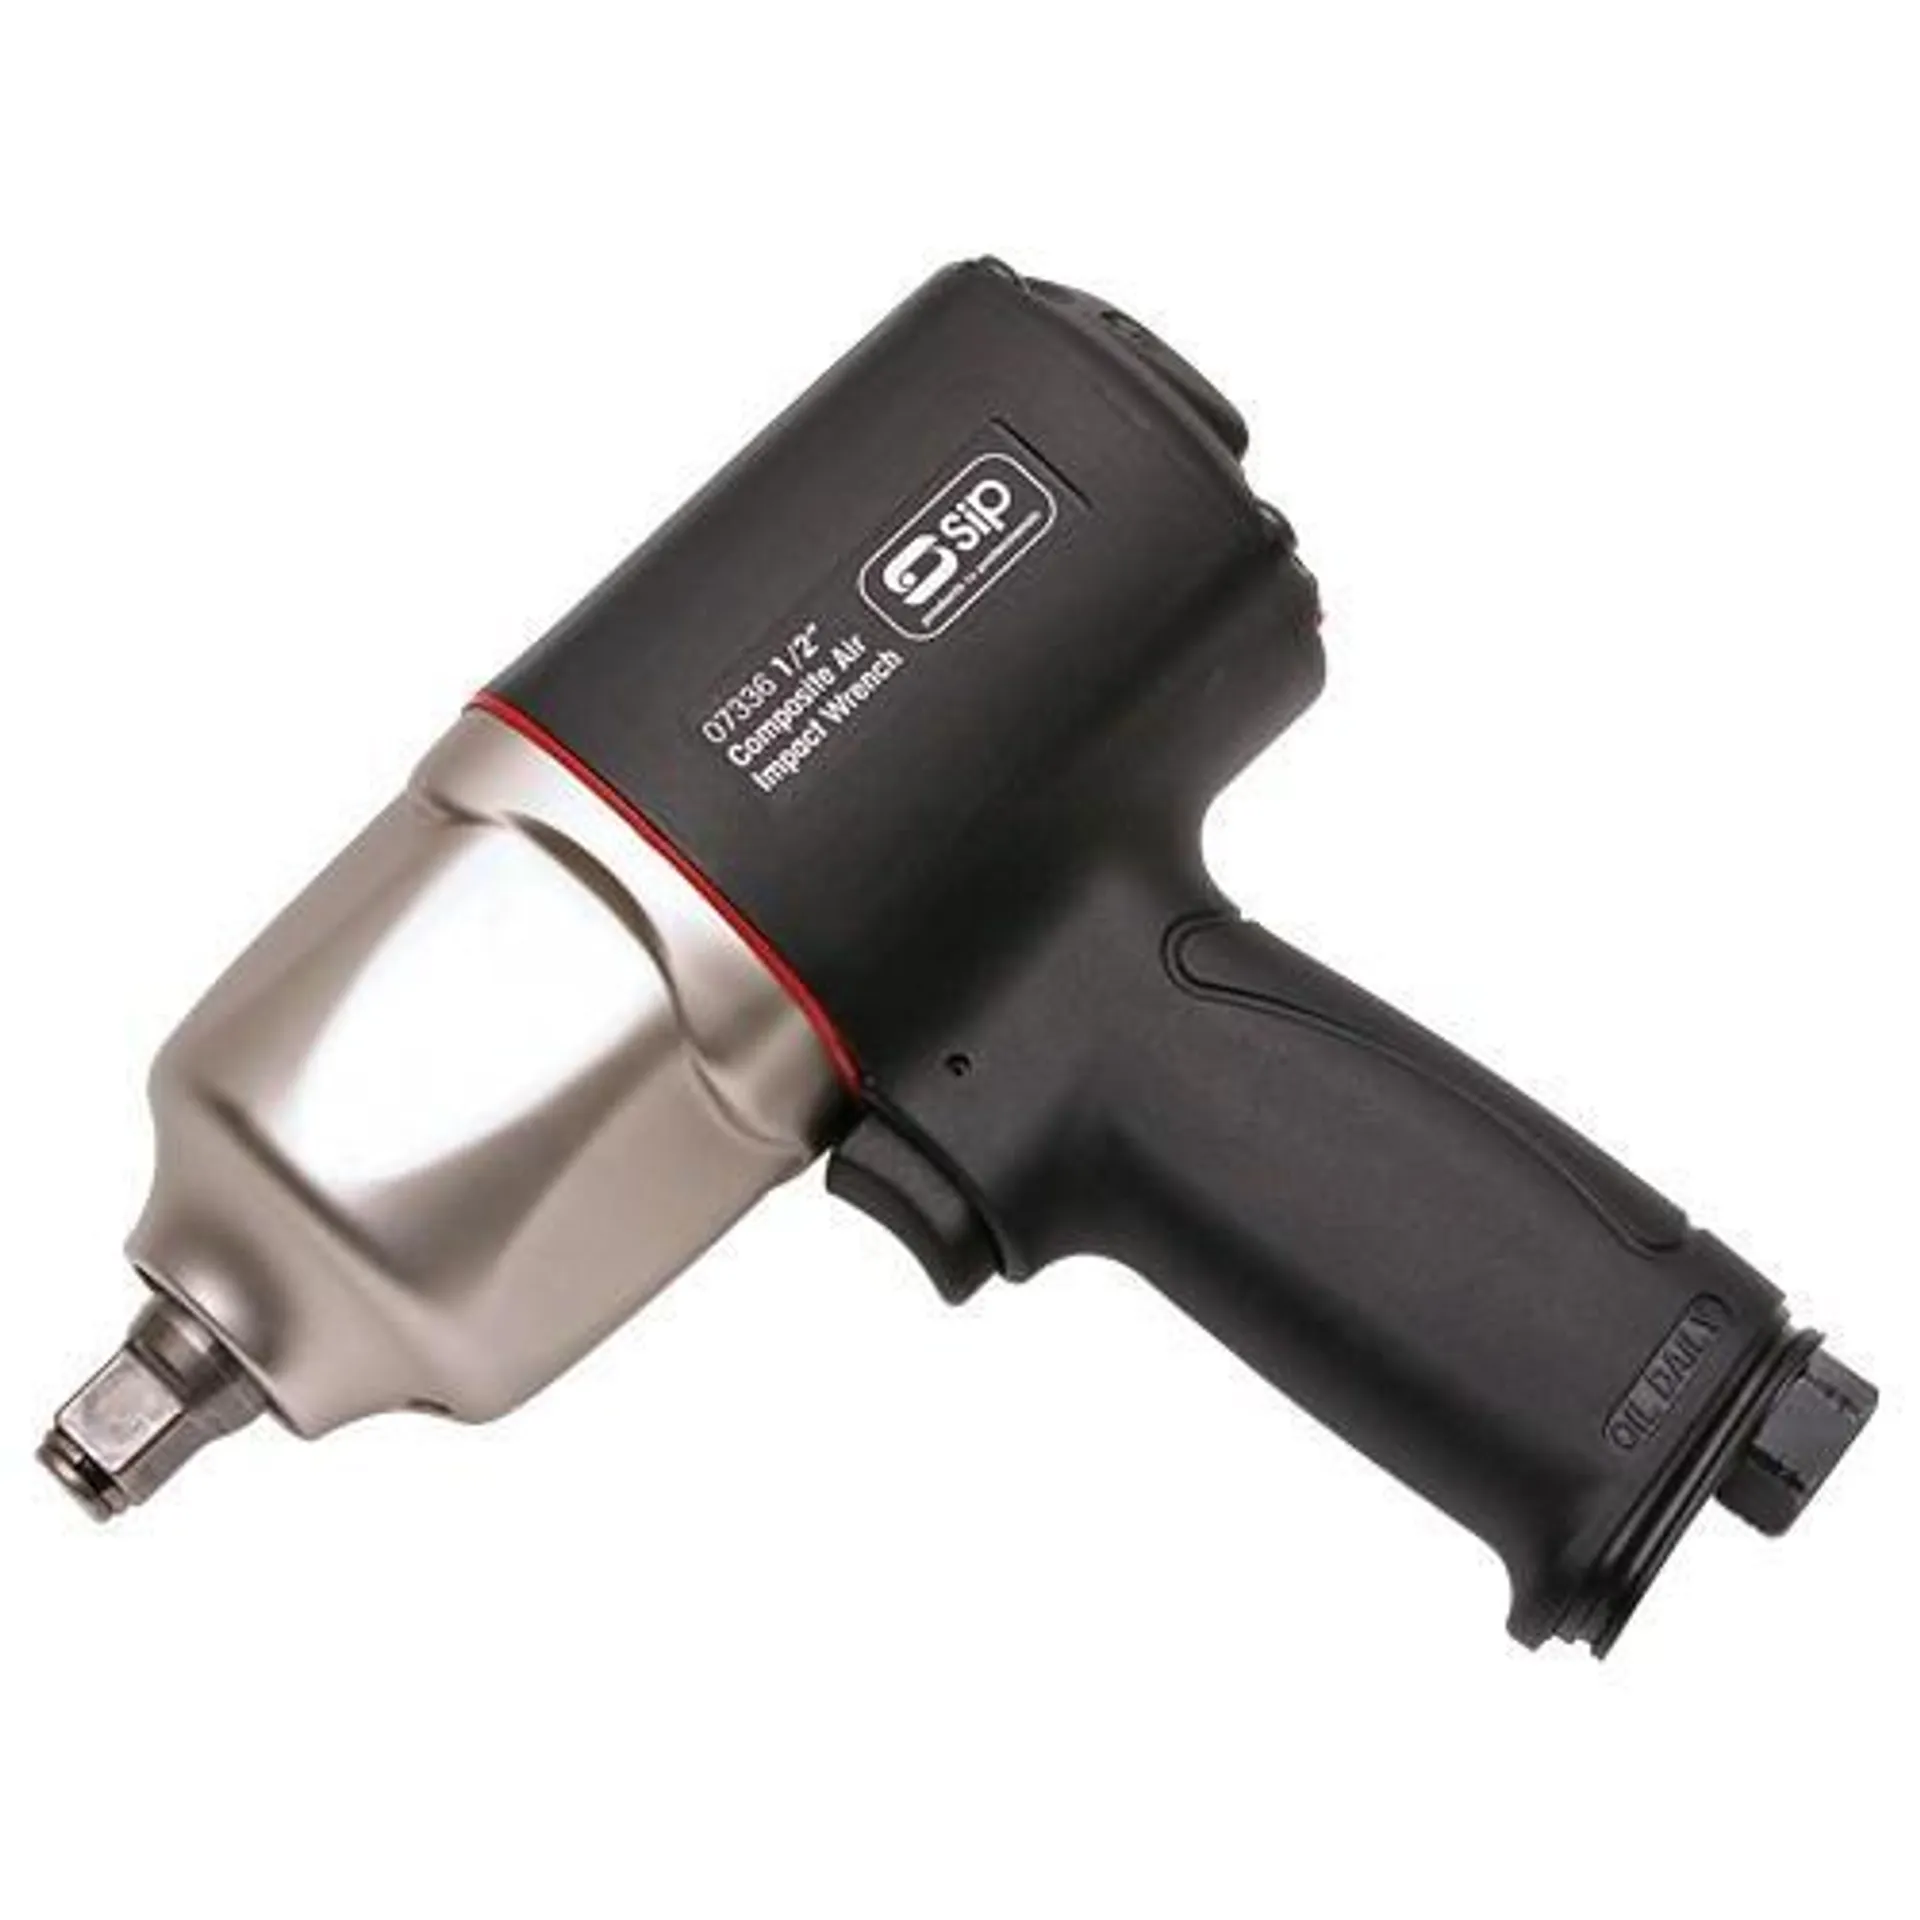 07336 1/2" Composite Impact Wrench (Twin Hammer) - 430 Ft/Lbs (585 Nm)